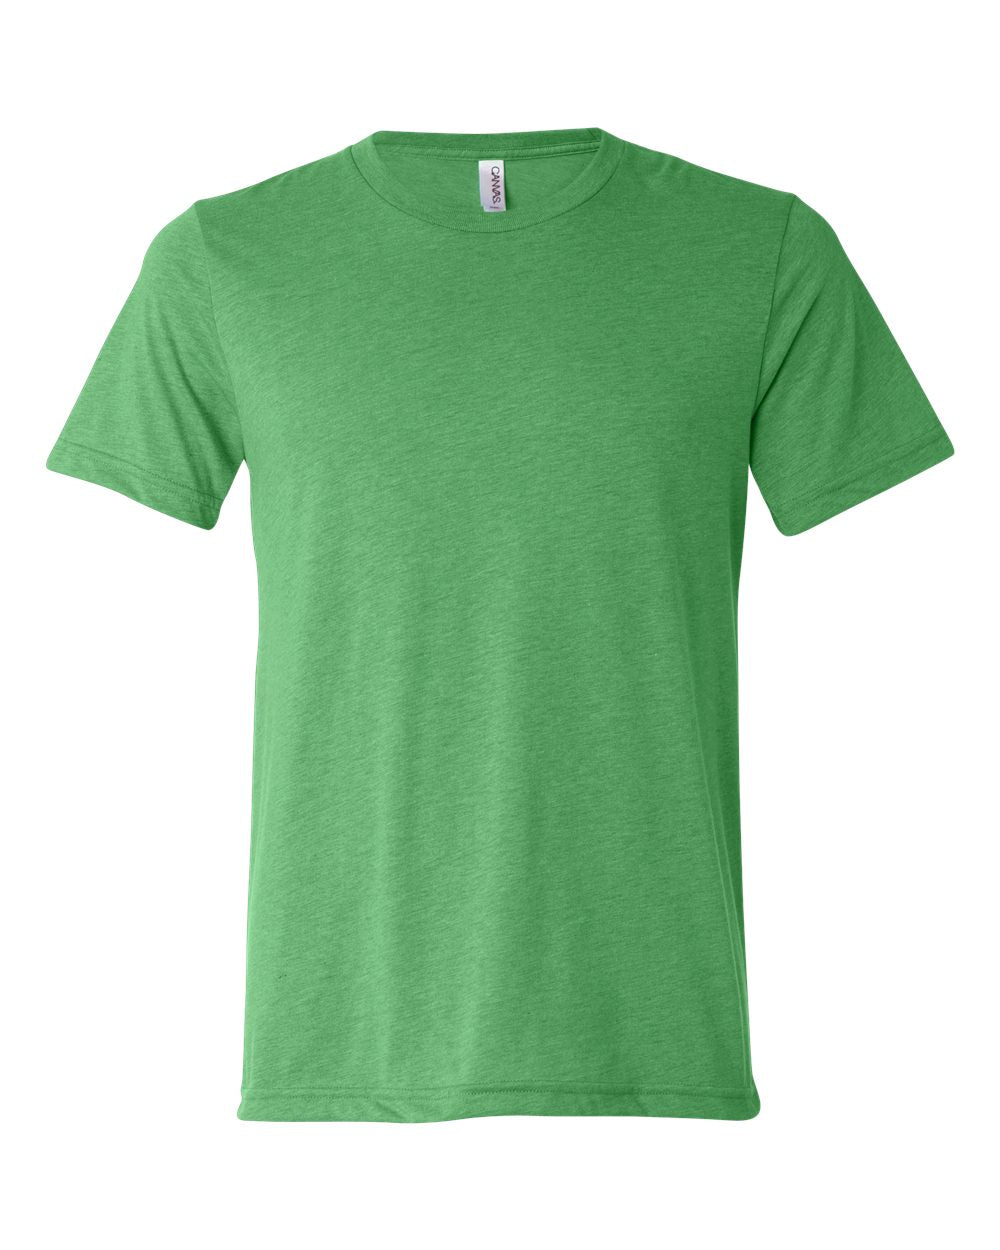 Bella + Canvas Triblend Tee (3413) in Green Triblend